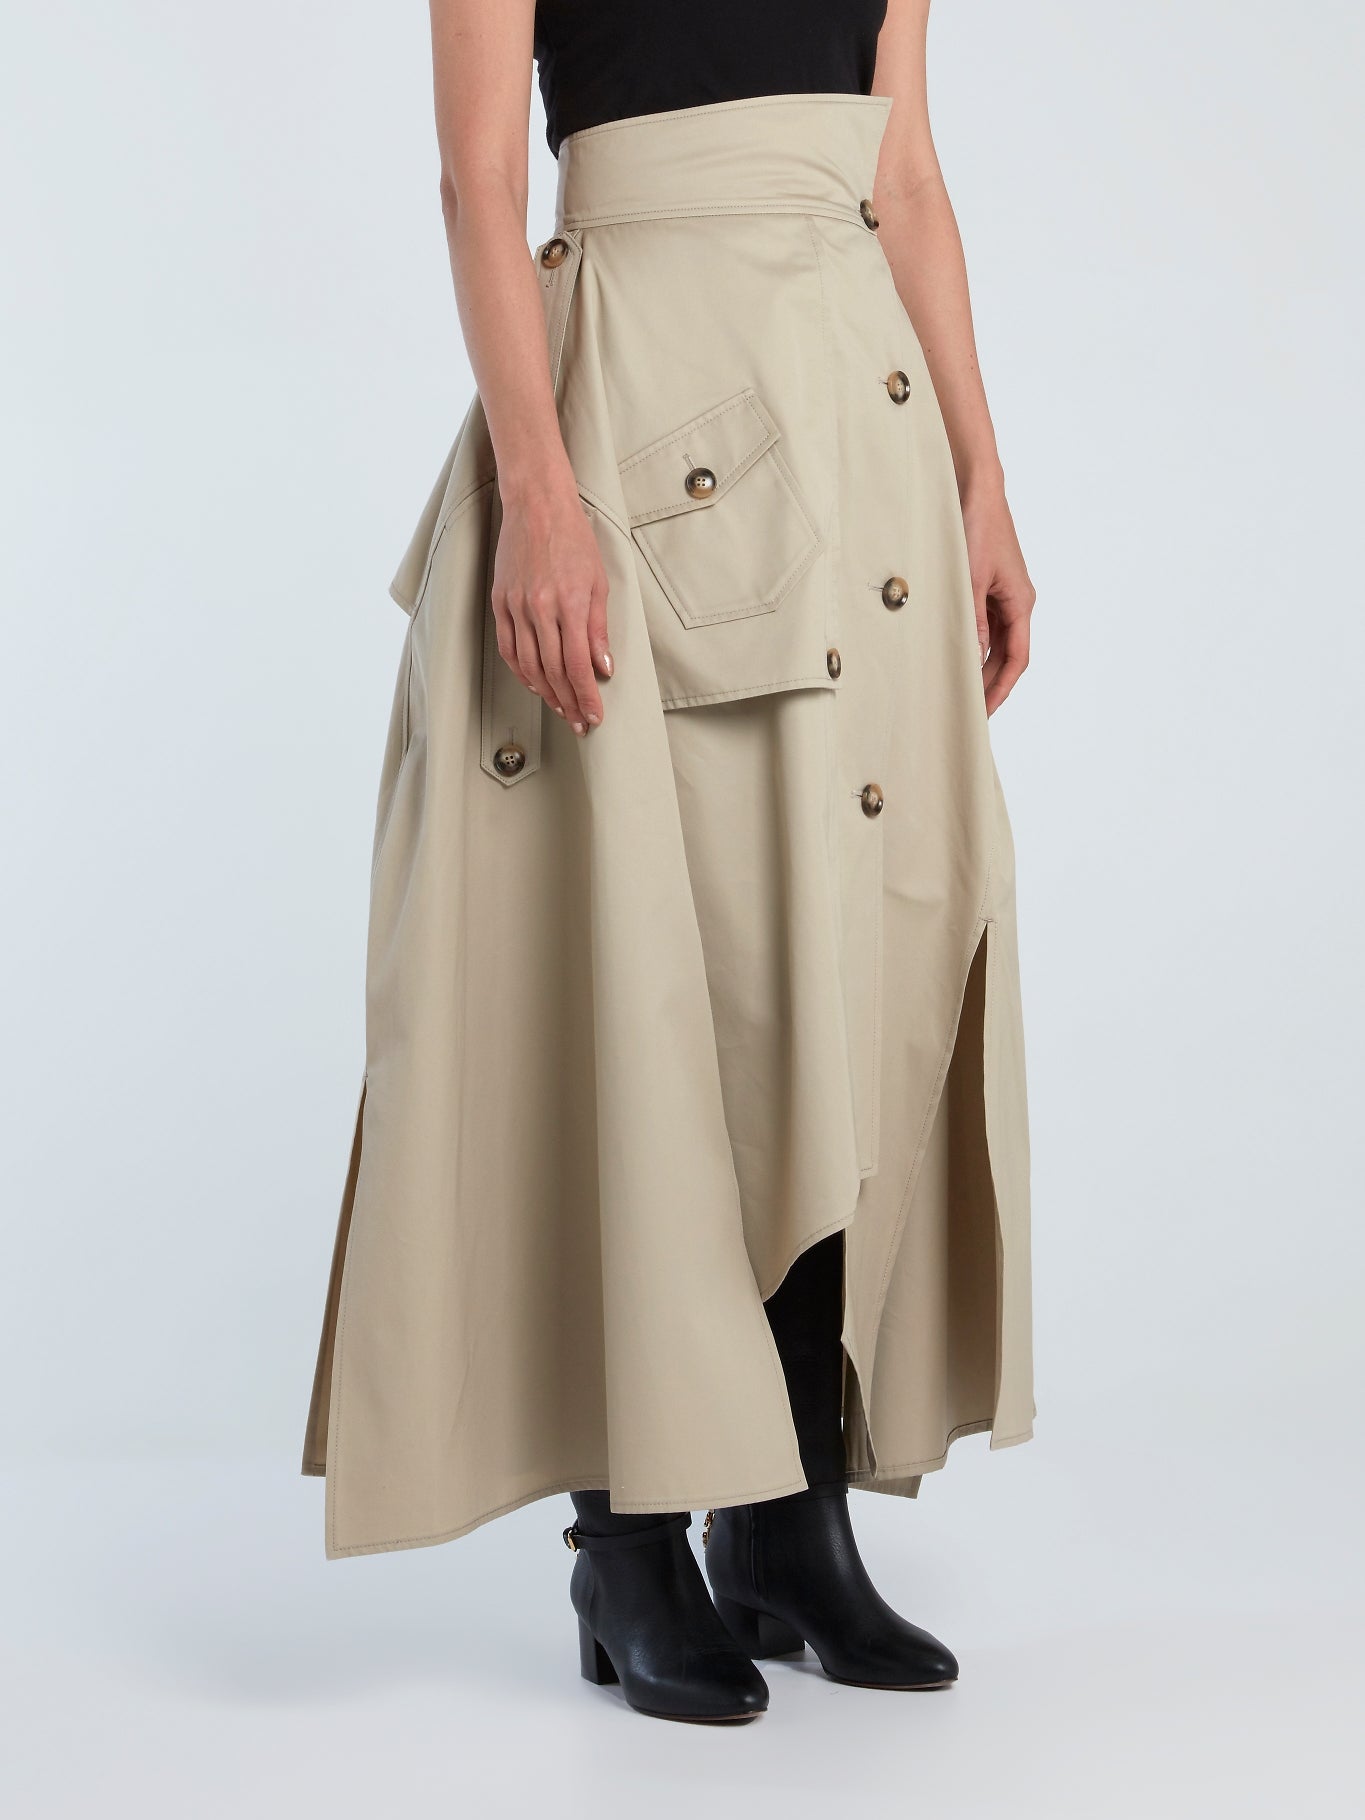 Reconstructed Trench Form Maxi Skirt – Global Store Maison-B-More